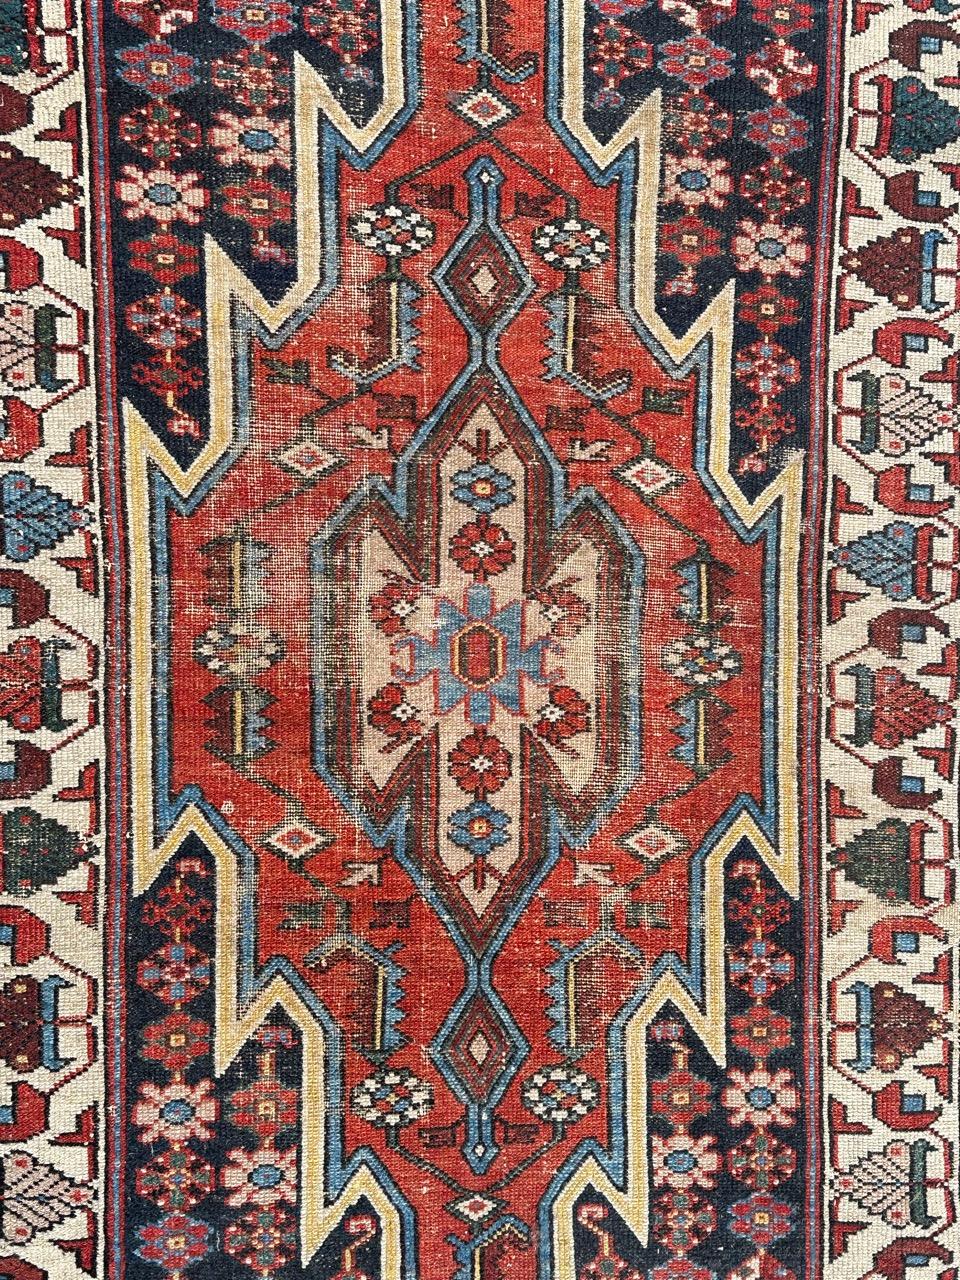 Pretty mid century rustic mazlaghan rug with beautiful geometrical design and nice colours with red, blue, navy and white, entirely hand knotted with wool on cotton foundation. Some missing, Uniform wears due to the age and use. 

✨✨✨
